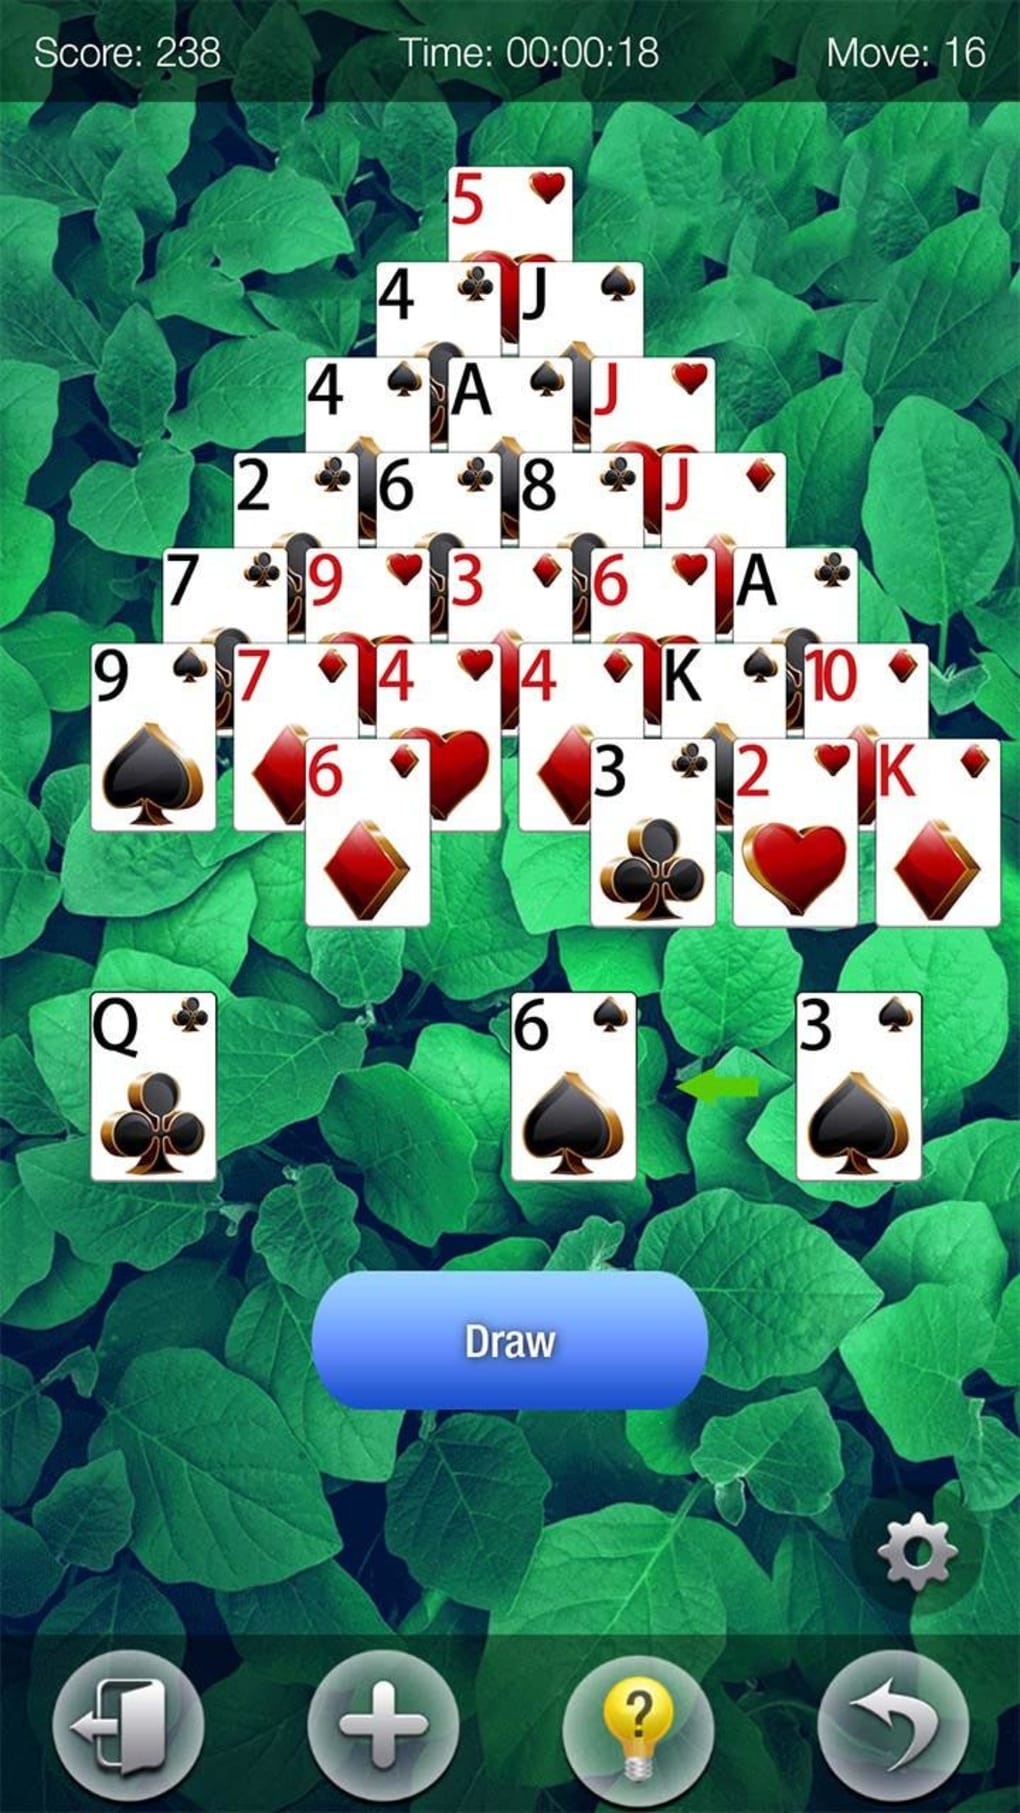 Spider Solitaire Collection, Nintendo Switch download software, Games